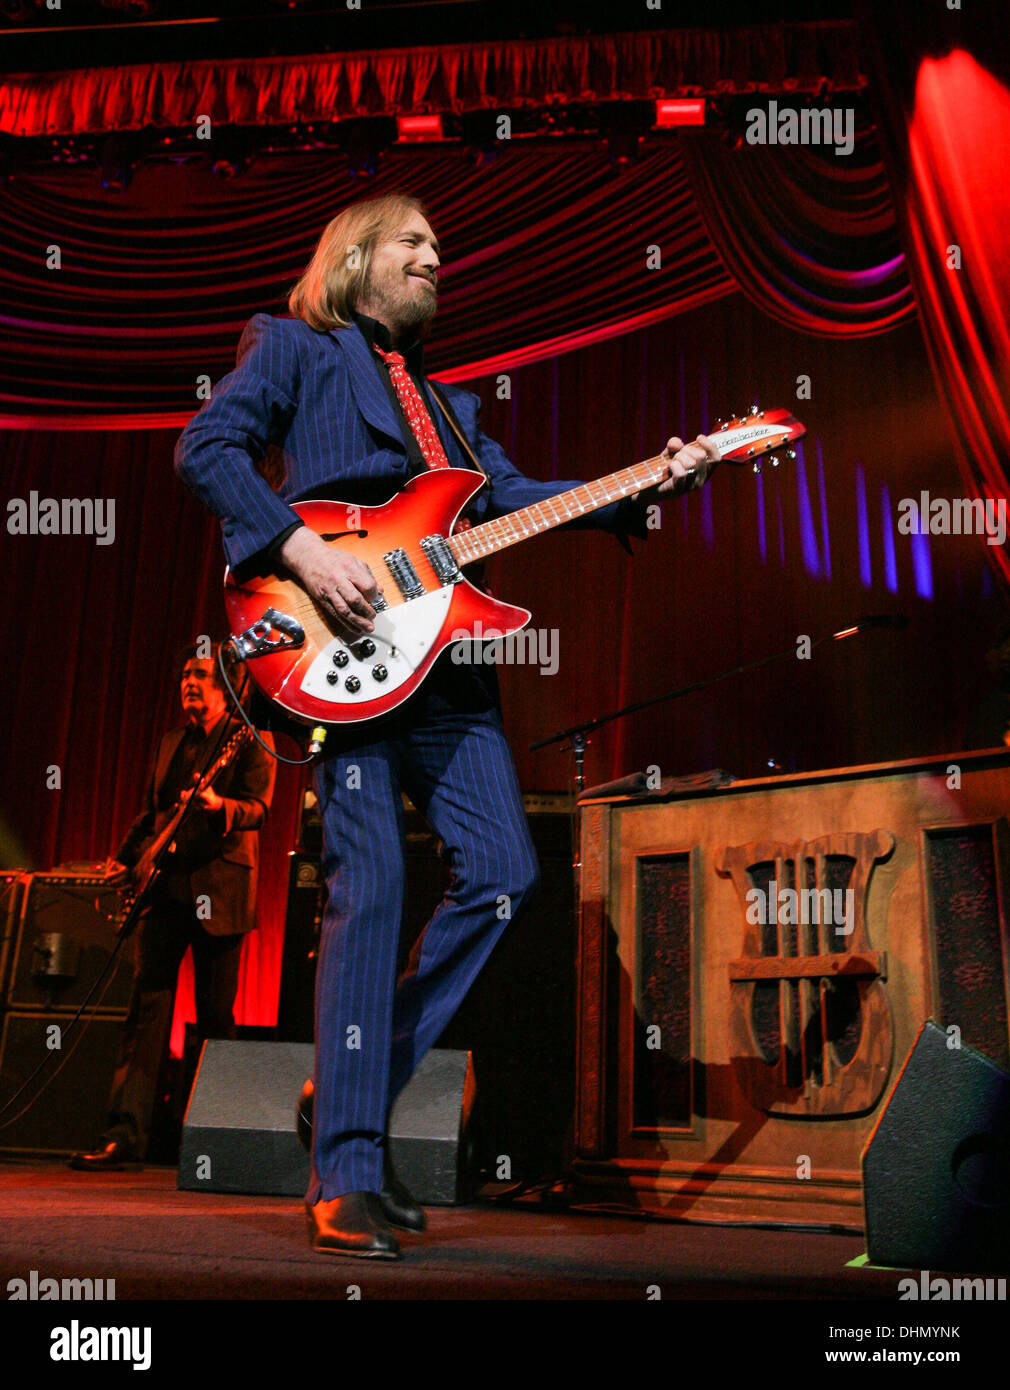 Tom Petty and The Heartbreakers performing at the Amway Center  Orlando, Florida - 03.05.12 Stock Photo